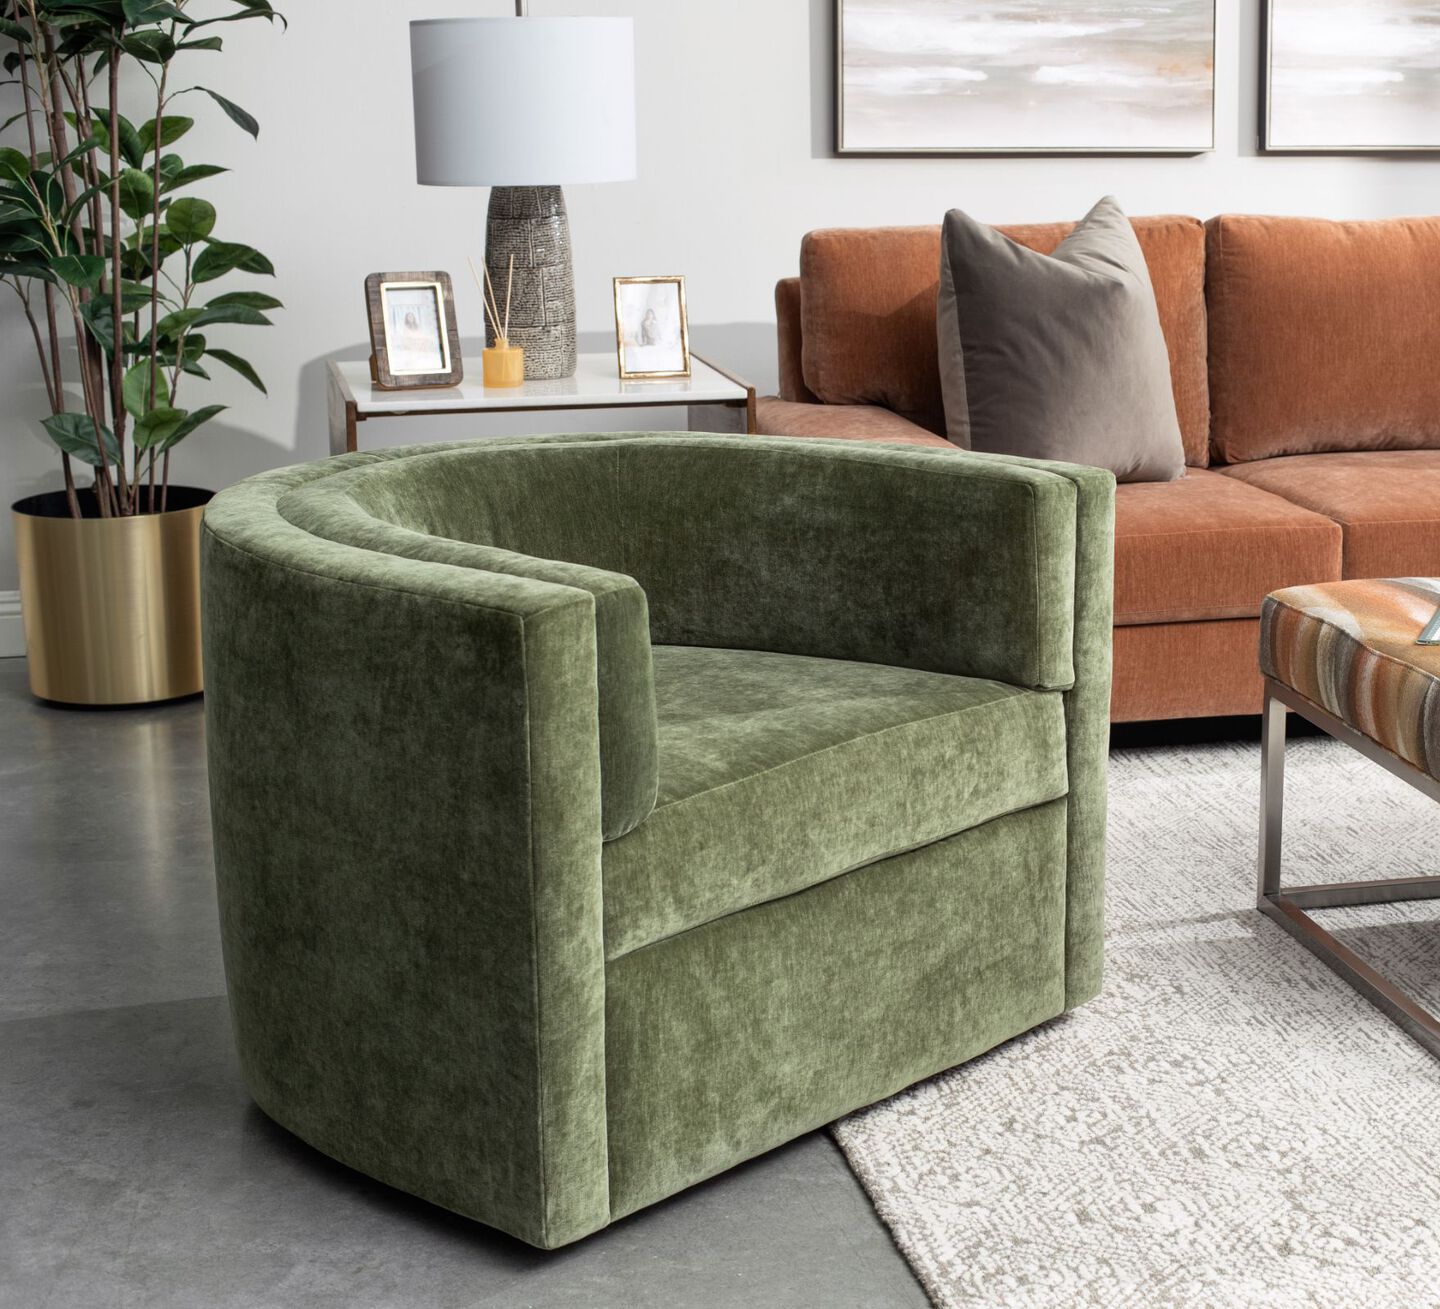 Living room with orange couch and a green velvet accent chair